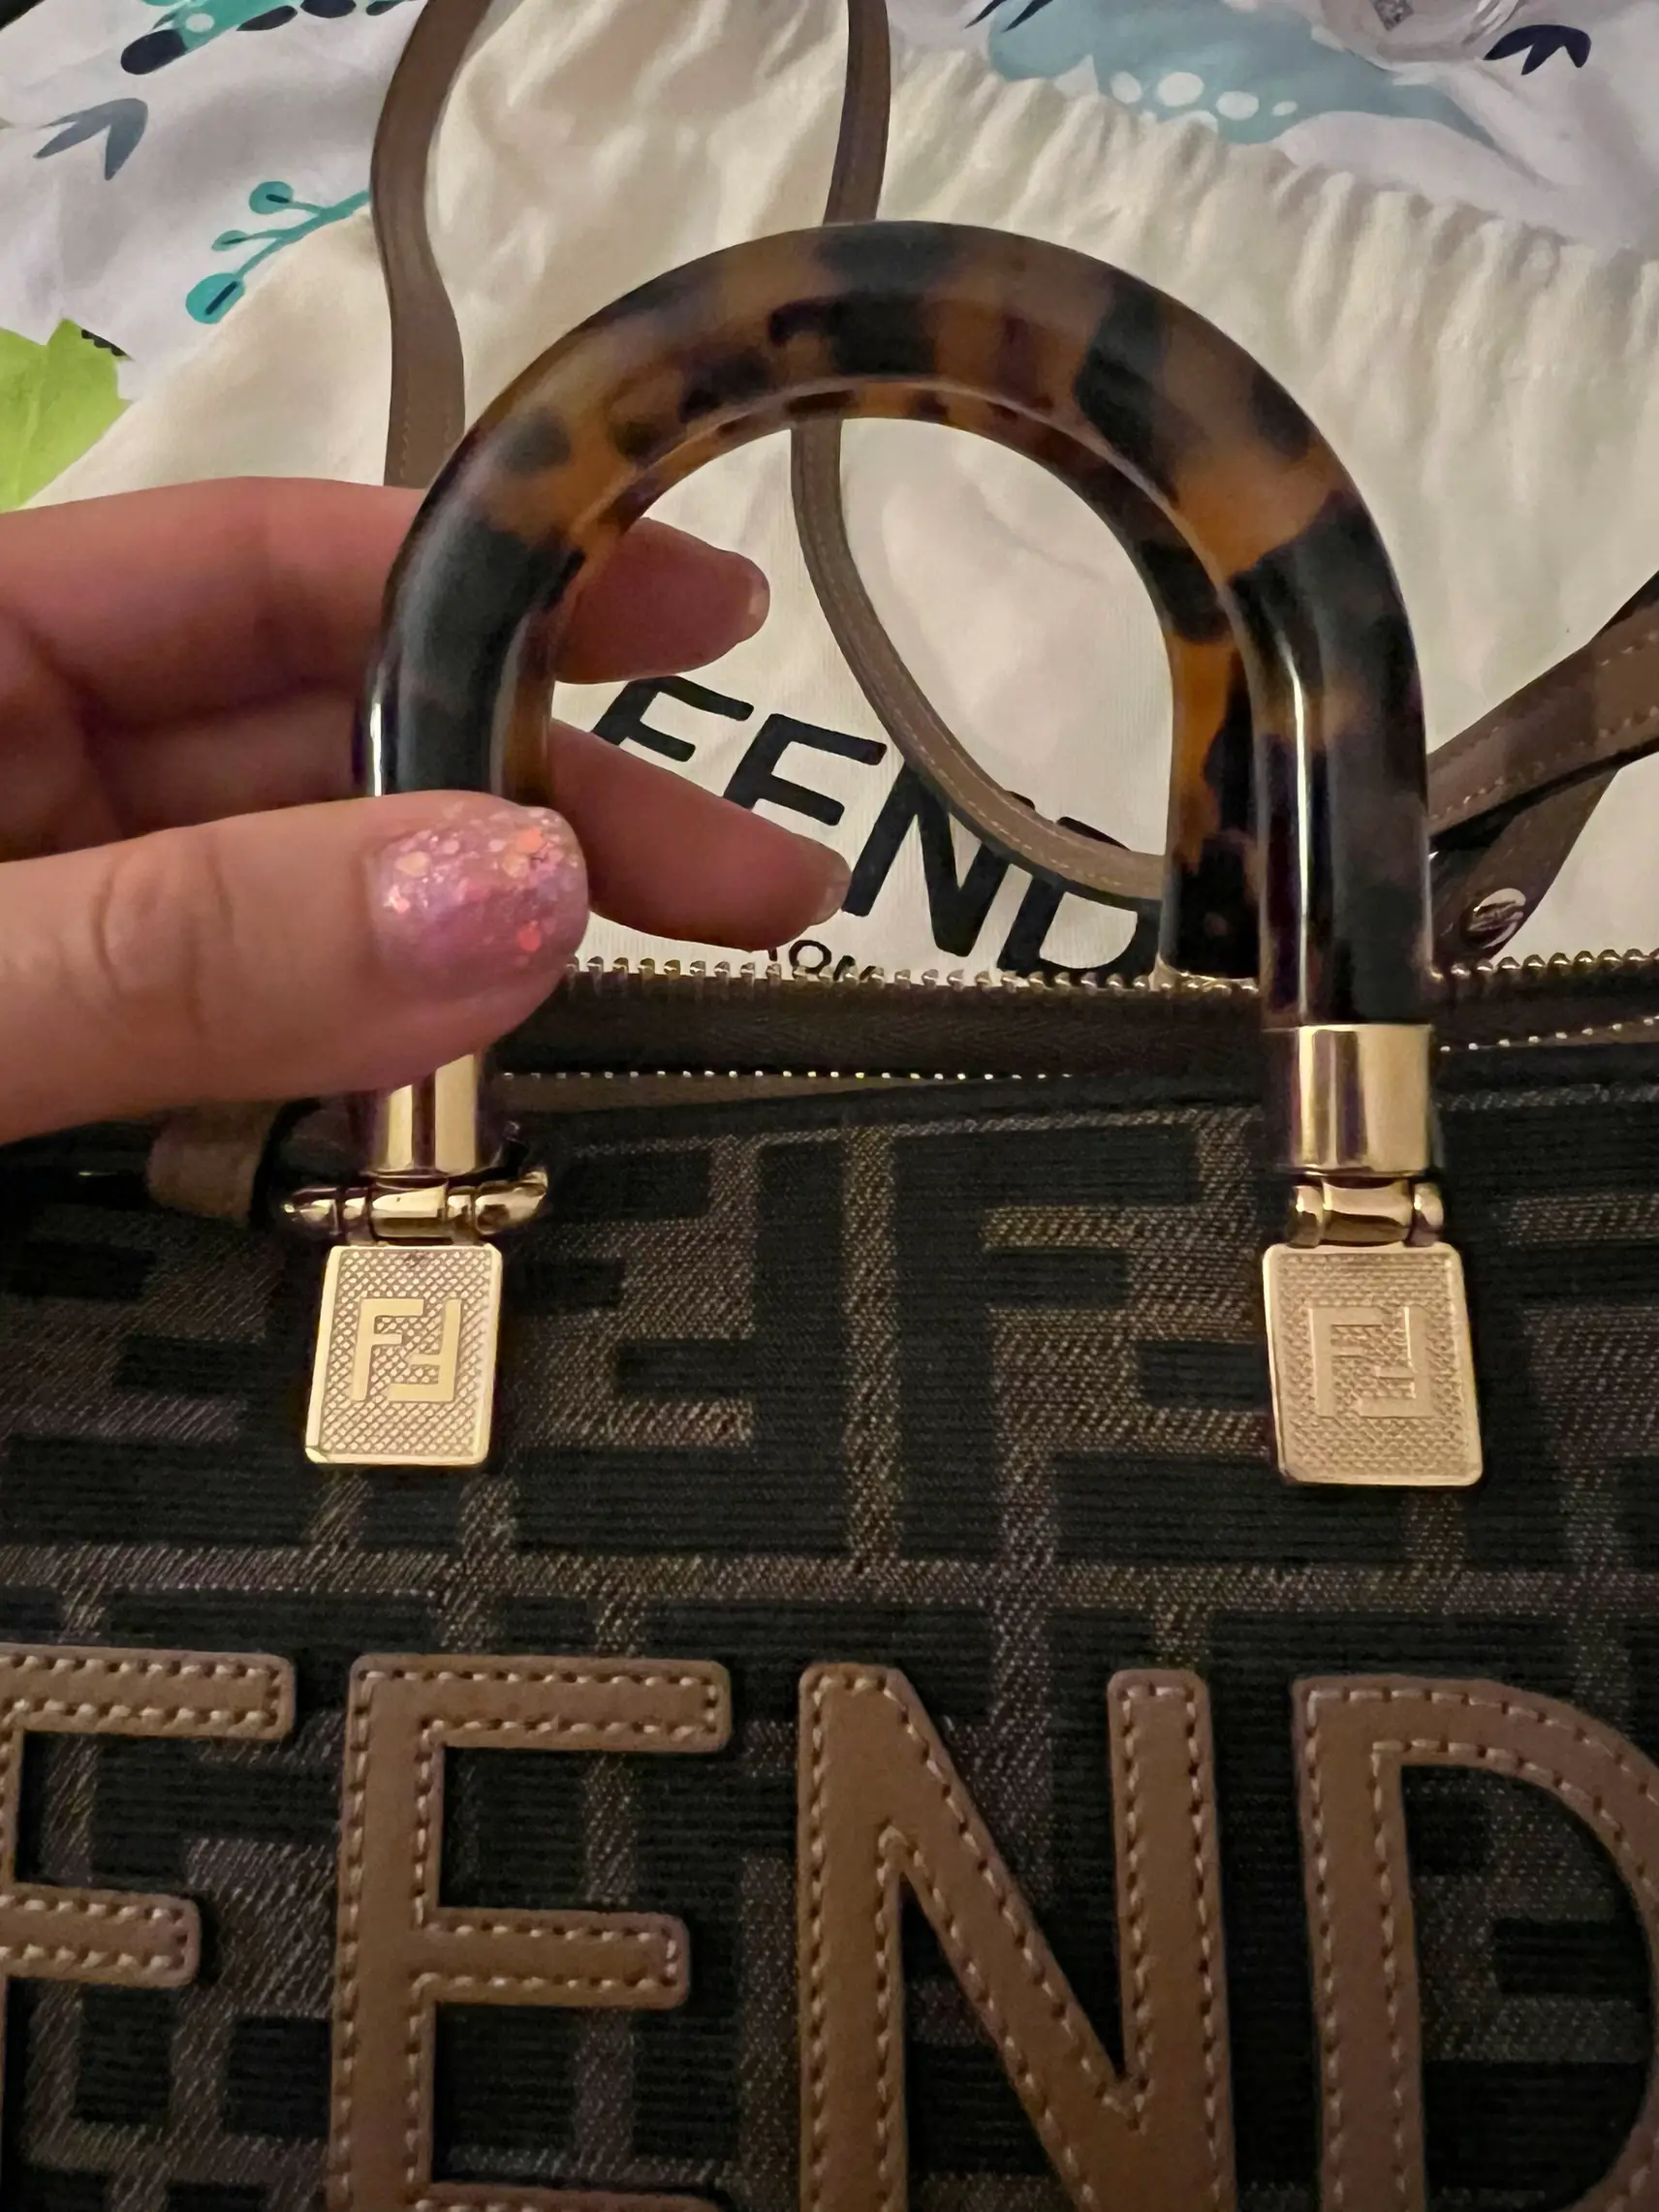 FENDI MINI BAGUETTE REVIEW 2021 WITH PROS AND CONS